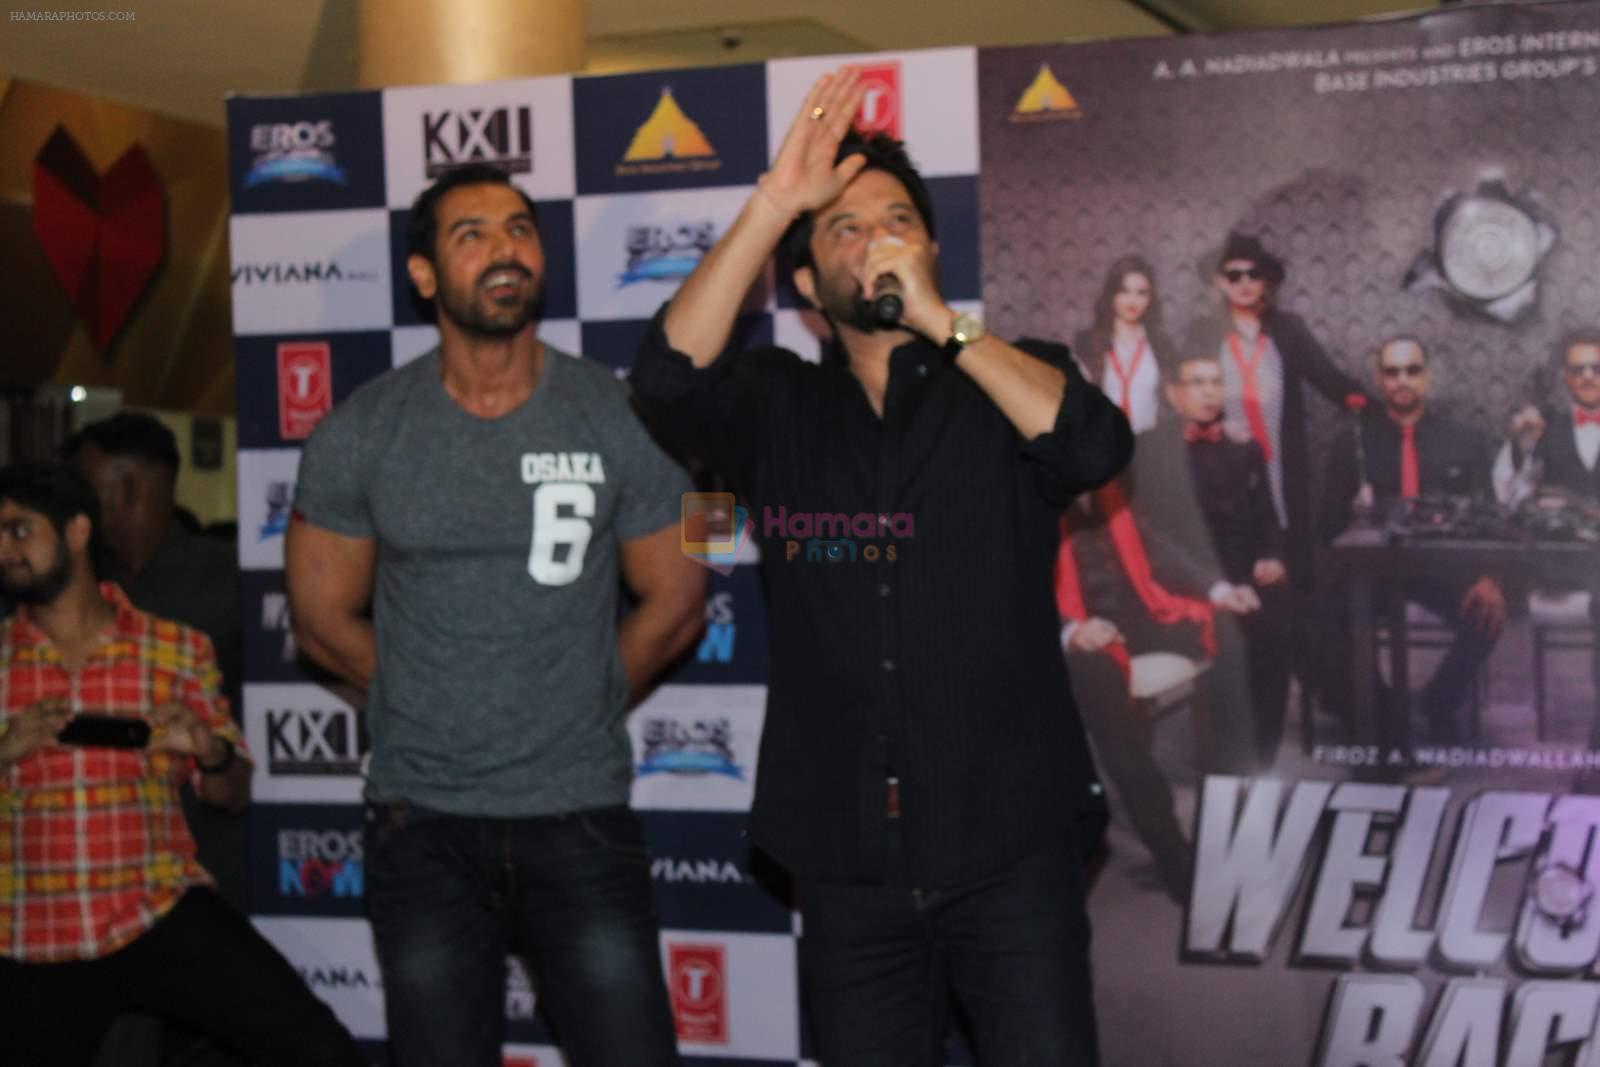 Anil Kapoor, John Abraham at Welcome back promotions in Thane, Mumbai on 23rd Aug 2015